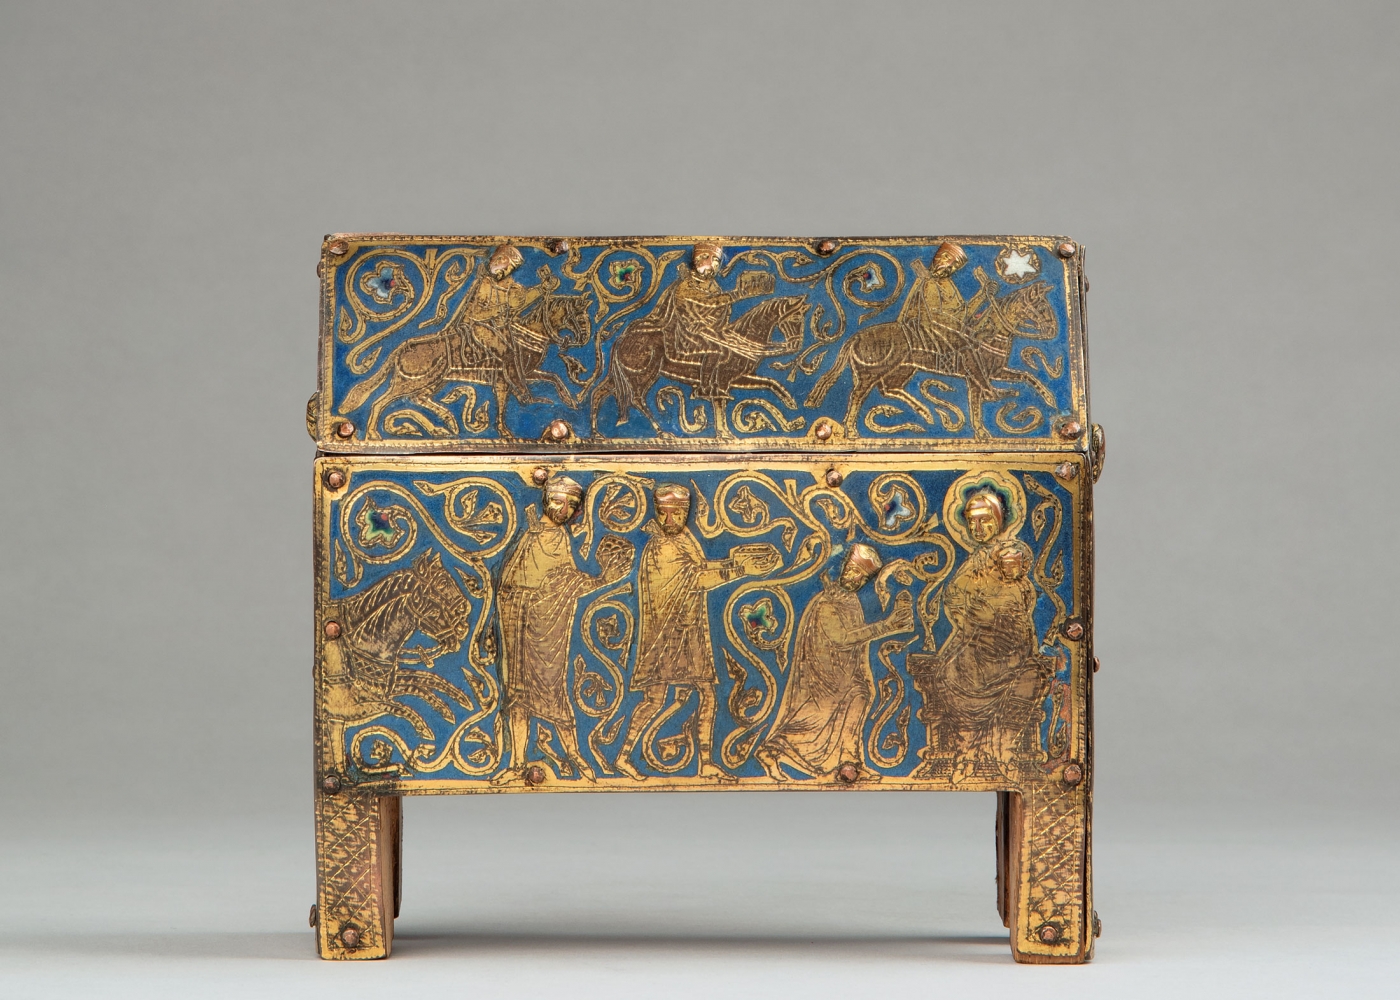 A reliquary chasse showing the Journey and Adoration of the Magi, c. 1230